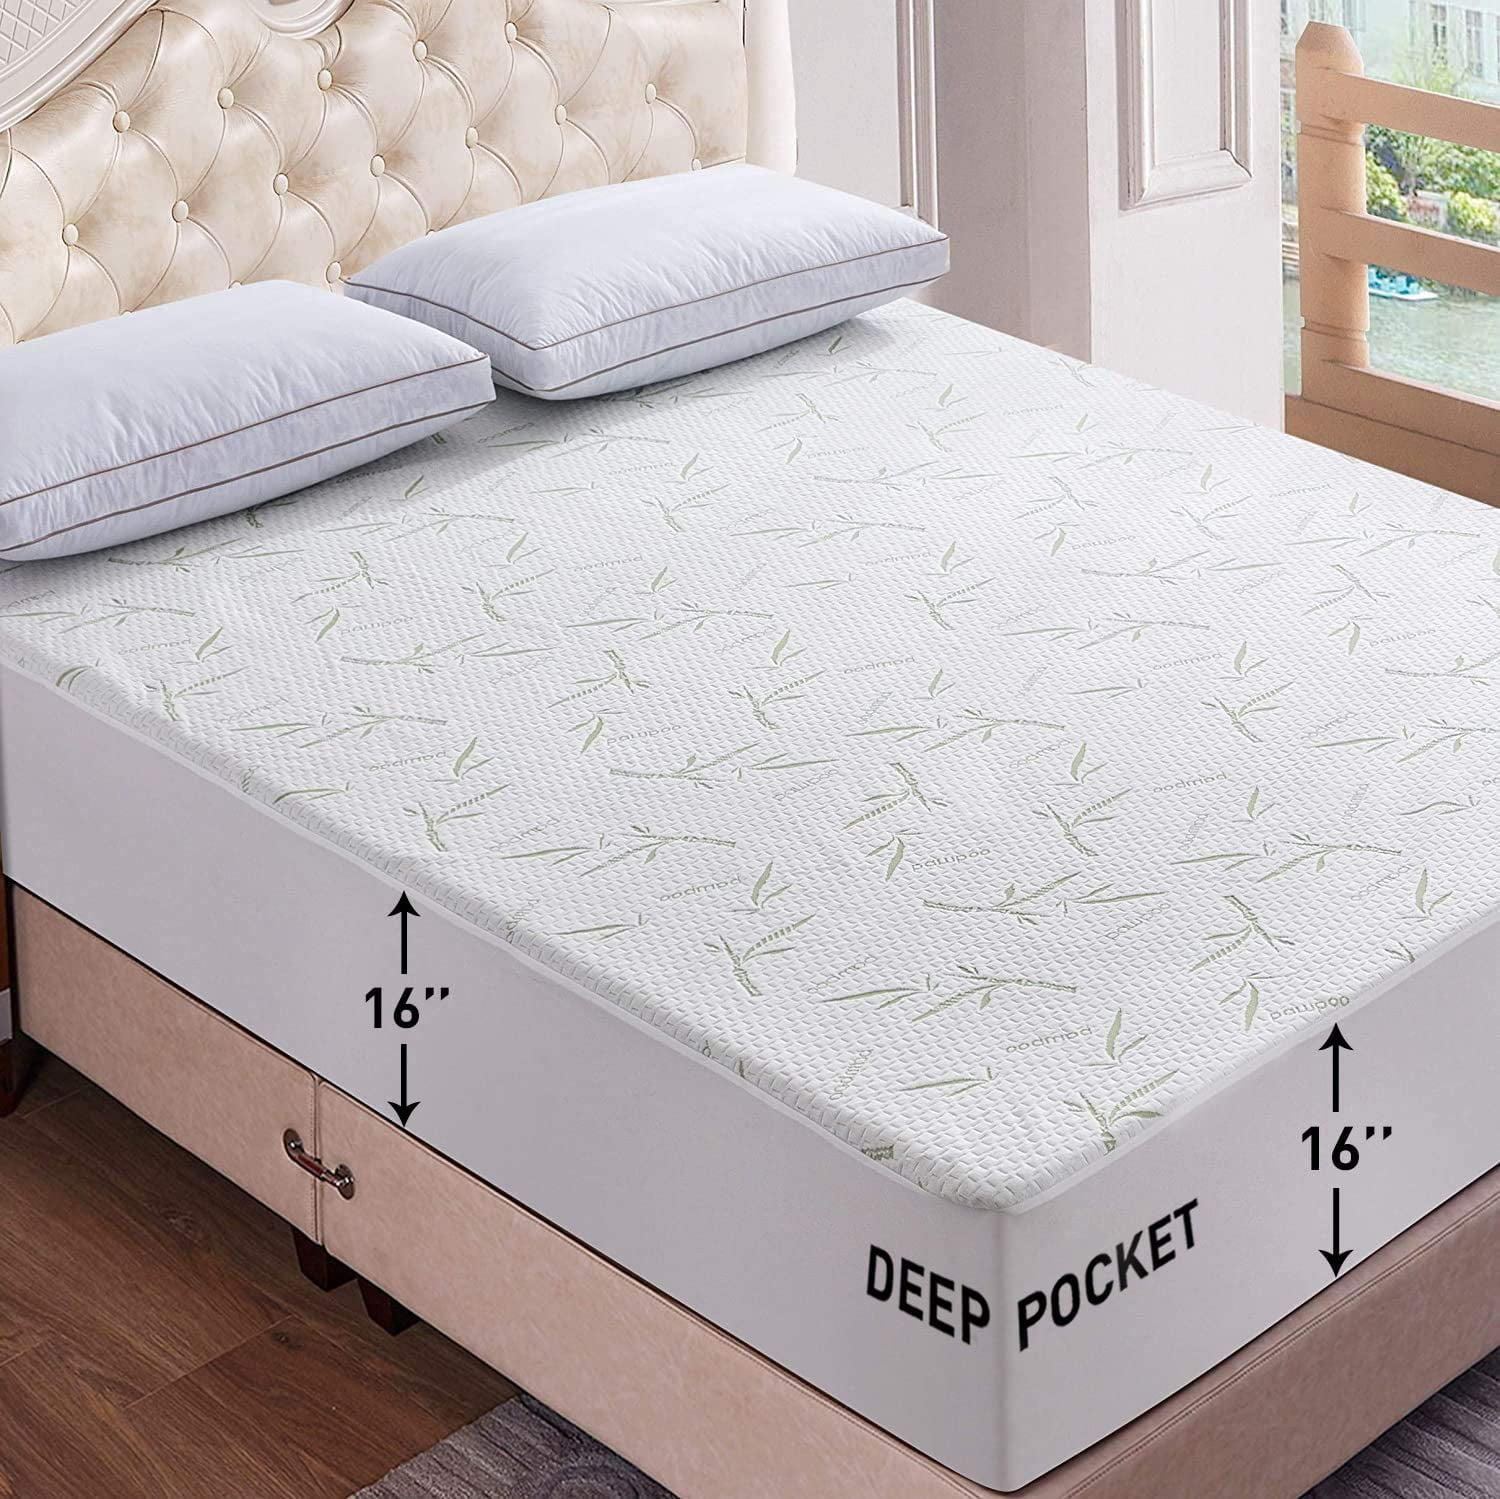 NEW MATTRESS COVER King Queen Full Size Hypoallergenic Bed Pad Protector White 